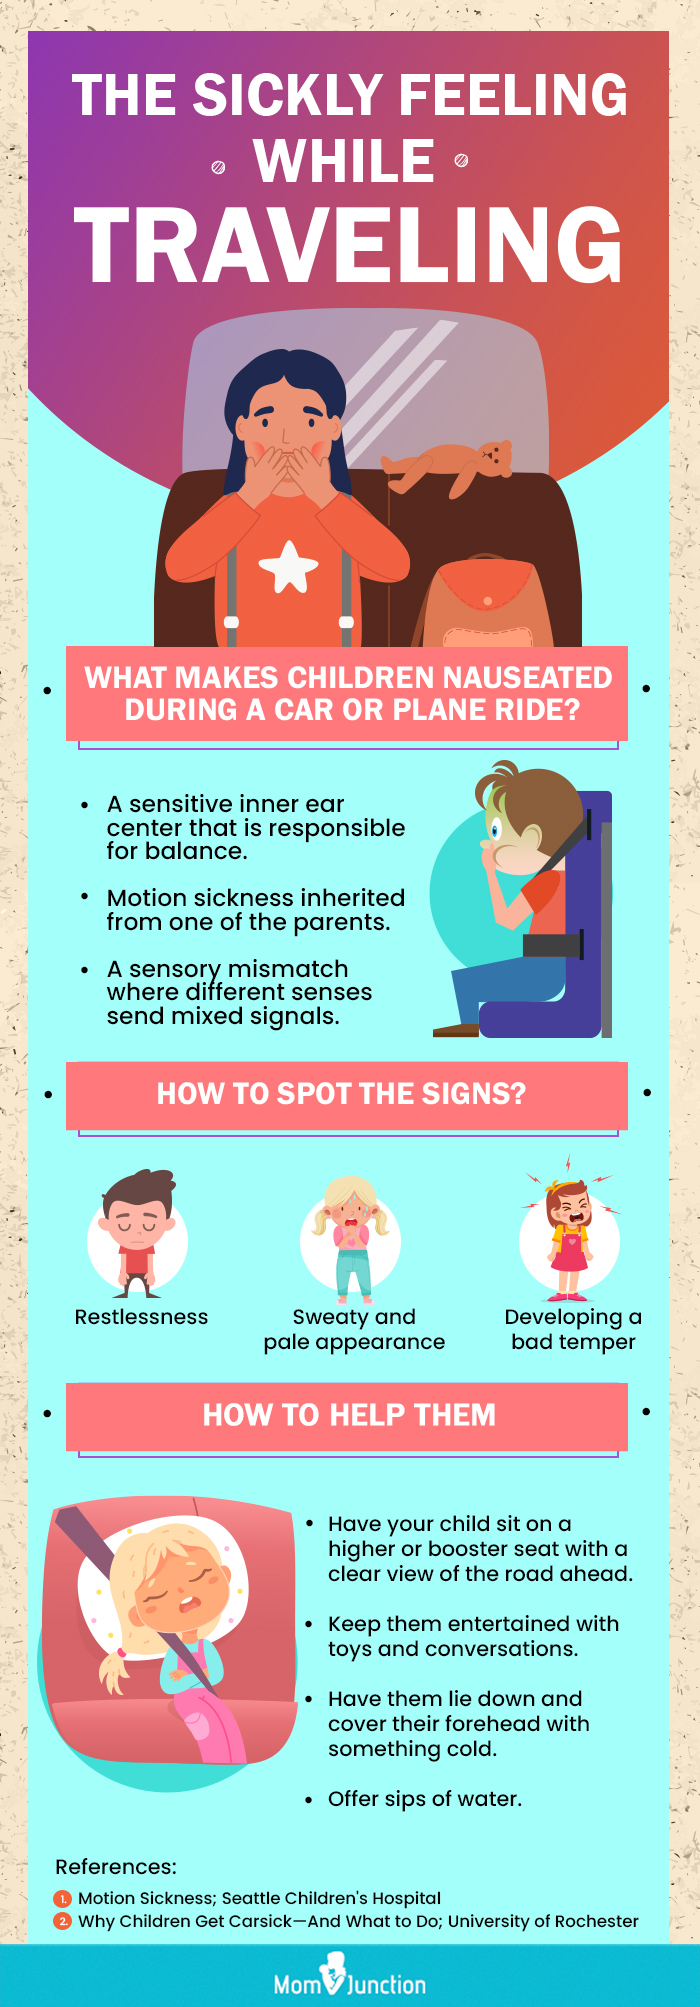 motion sickness-induced nausea in children (infographic)